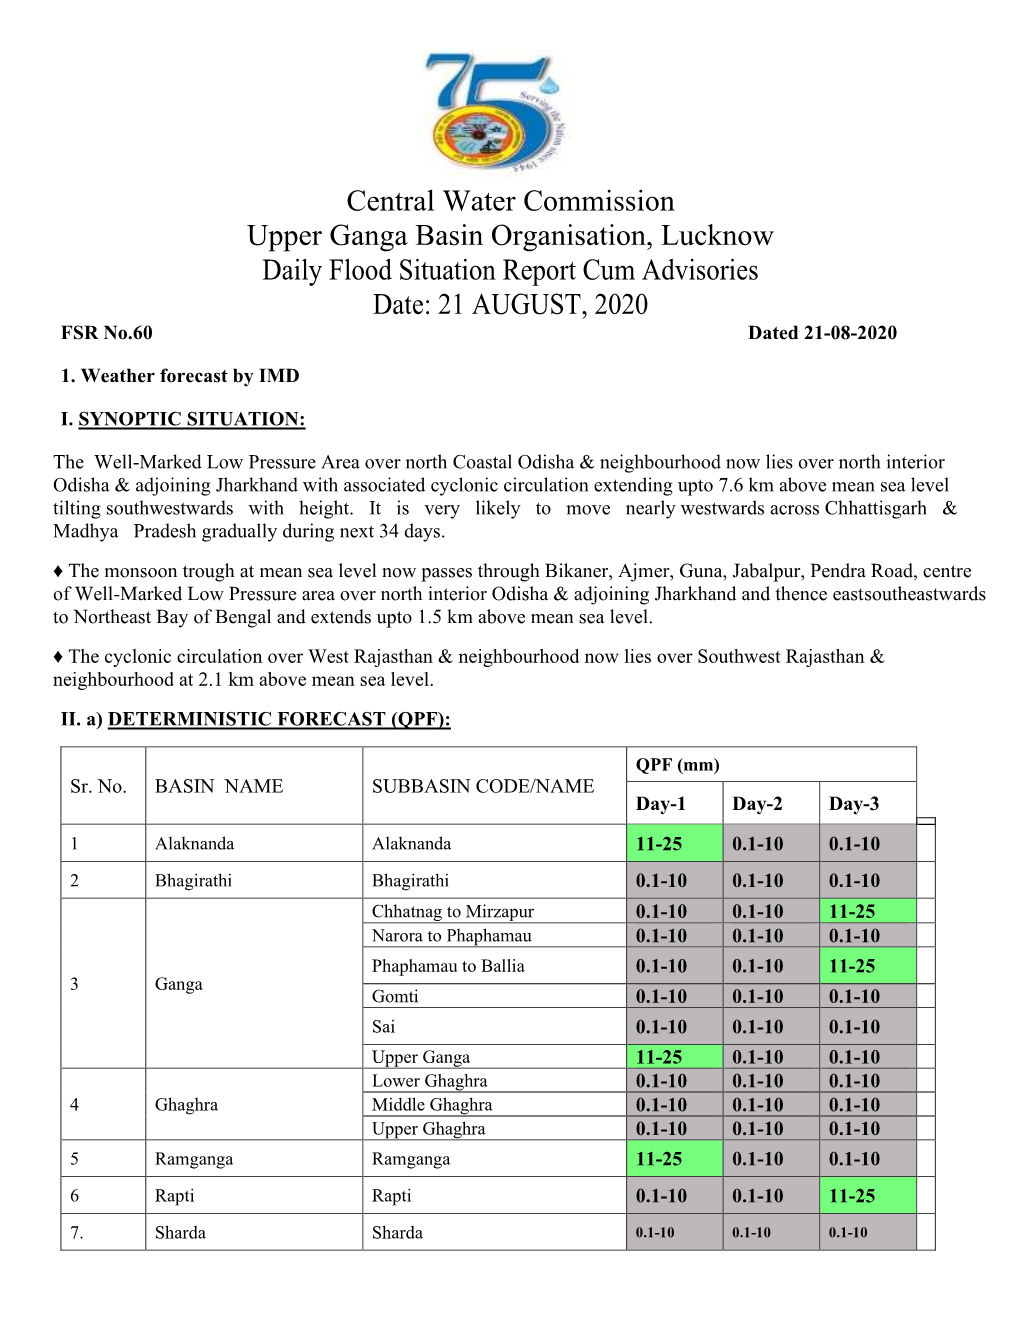 Central Water Commission Upper Ganga Basin Organisation, Lucknow Daily Flood Situation Report Cum Advisories Date: 21 AUGUST, 2020 FSR No.60 Dated 21-08-2020